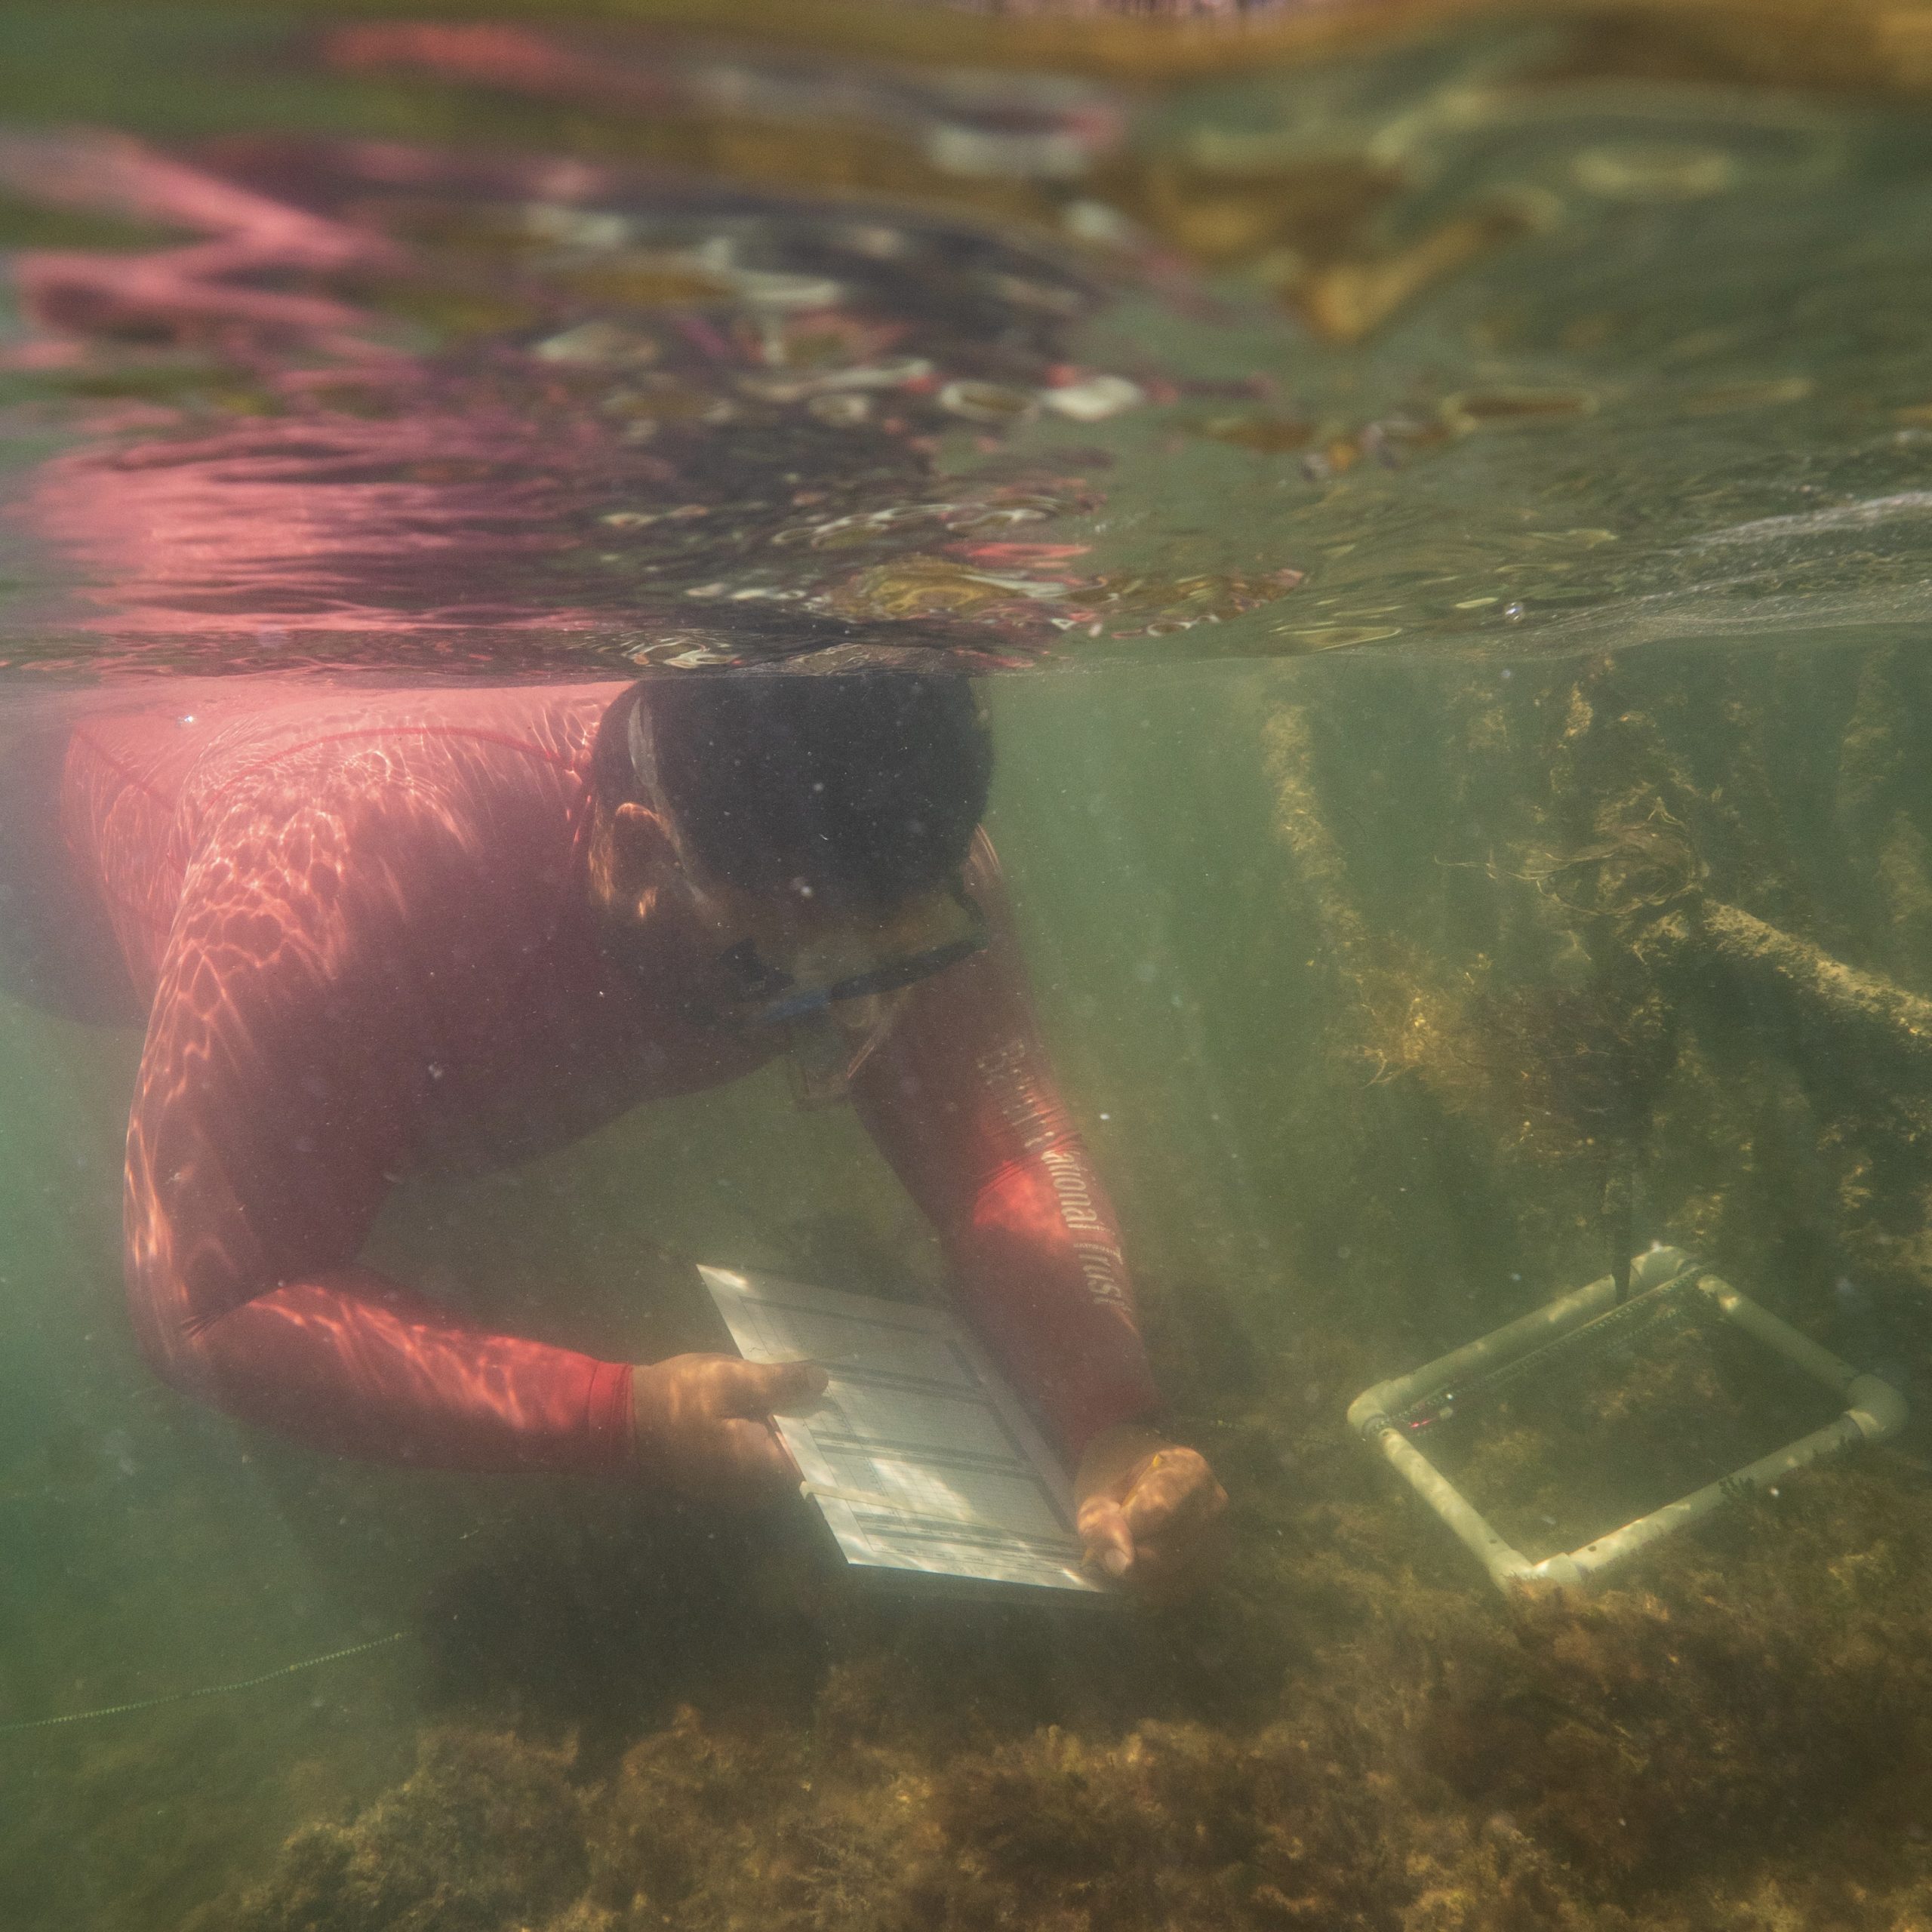 Though I am often surveying coral reefs, I do prefer to spend my time in the calmer mangrove ecosystems. Here I am conducting a survey documenting and recording all species on the seafloor of the island of Andros. PC: Will Greene